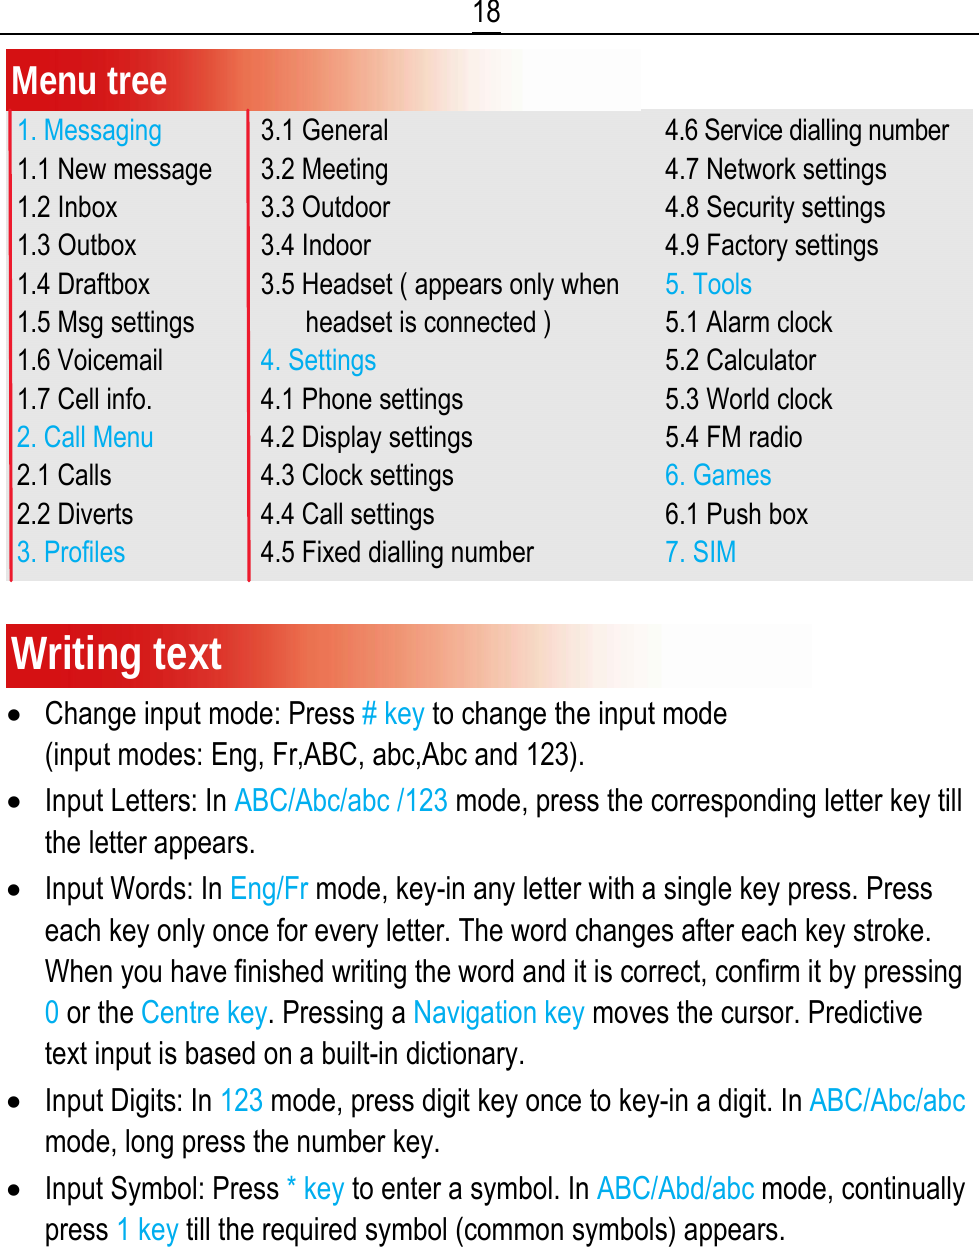  18 Menu tree 1. Messaging 1.1 New message 1.2 Inbox 1.3 Outbox 1.4 Draftbox 1.5 Msg settings 1.6 Voicemail 1.7 Cell info. 2. Call Menu 2.1 Calls 2.2 Diverts 3. Profiles 3.1 General 3.2 Meeting 3.3 Outdoor 3.4 Indoor 3.5 Headset ( appears only when       headset is connected ) 4. Settings 4.1 Phone settings 4.2 Display settings 4.3 Clock settings 4.4 Call settings 4.5 Fixed dialling number 4.6 Service dialling number 4.7 Network settings 4.8 Security settings 4.9 Factory settings 5. Tools 5.1 Alarm clock 5.2 Calculator 5.3 World clock 5.4 FM radio 6. Games 6.1 Push box 7. SIM Writing text • Change input mode: Press # key to change the input mode                                   (input modes: Eng, Fr,ABC, abc,Abc and 123). • Input Letters: In ABC/Abc/abc /123 mode, press the corresponding letter key till the letter appears. • Input Words: In Eng/Fr mode, key-in any letter with a single key press. Press each key only once for every letter. The word changes after each key stroke. When you have finished writing the word and it is correct, confirm it by pressing 0 or the Centre key. Pressing a Navigation key moves the cursor. Predictive text input is based on a built-in dictionary. • Input Digits: In 123 mode, press digit key once to key-in a digit. In ABC/Abc/abc mode, long press the number key. • Input Symbol: Press * key to enter a symbol. In ABC/Abd/abc mode, continually press 1 key till the required symbol (common symbols) appears. 